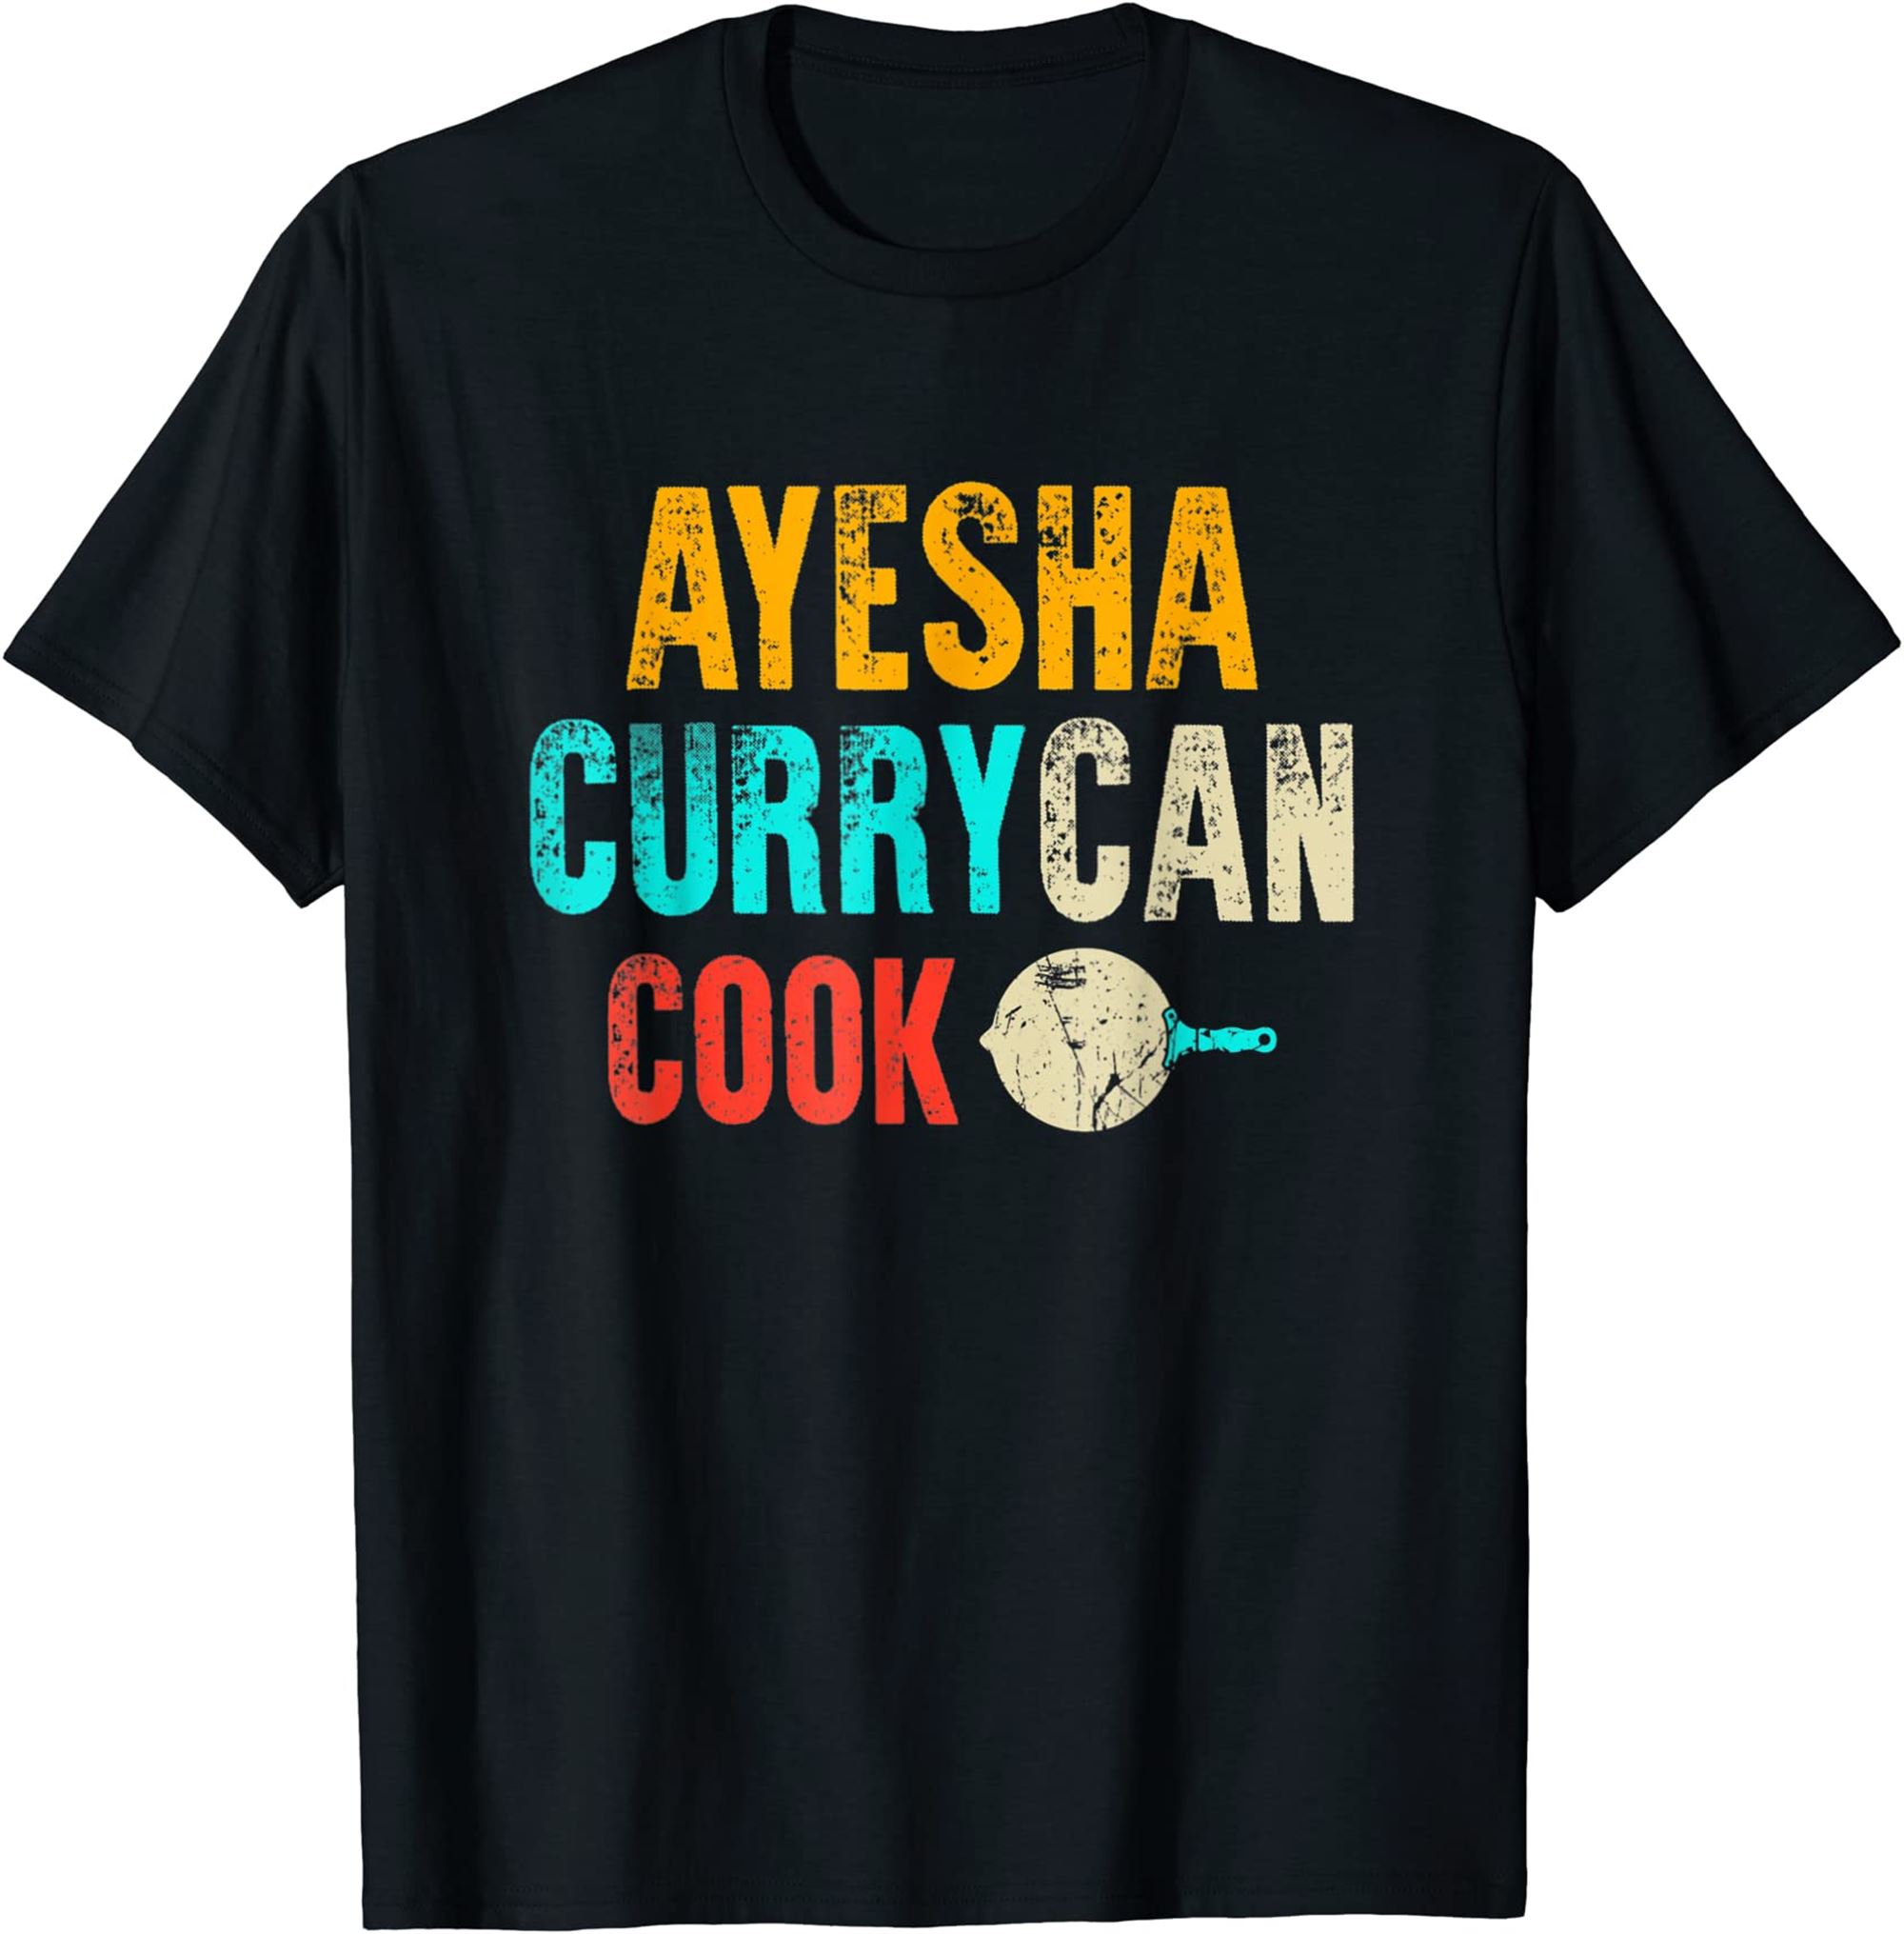 Ayesha Curry Can Cook Funny T-shirt Plus Size Up To 5xl